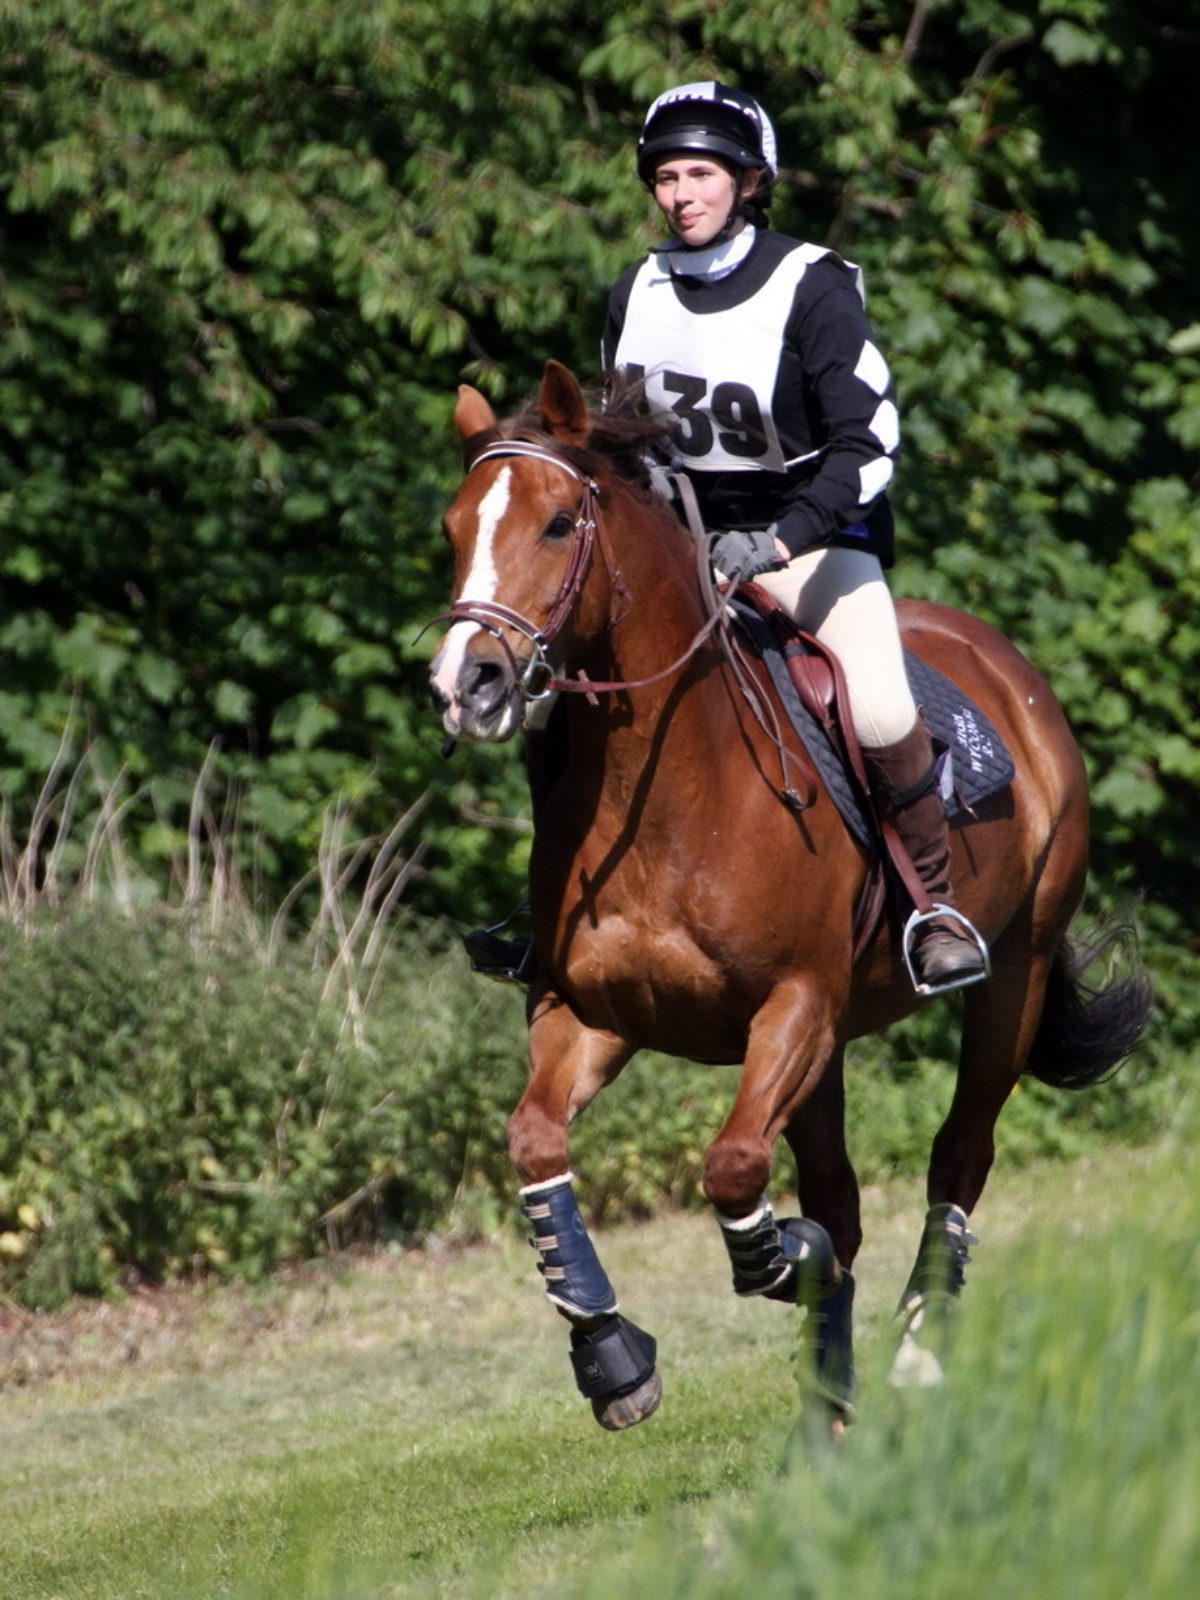 HWRC was formed in 1989 and has grown to be a medium sized Affiliated Riding Club with both a Junior and a Senior membership